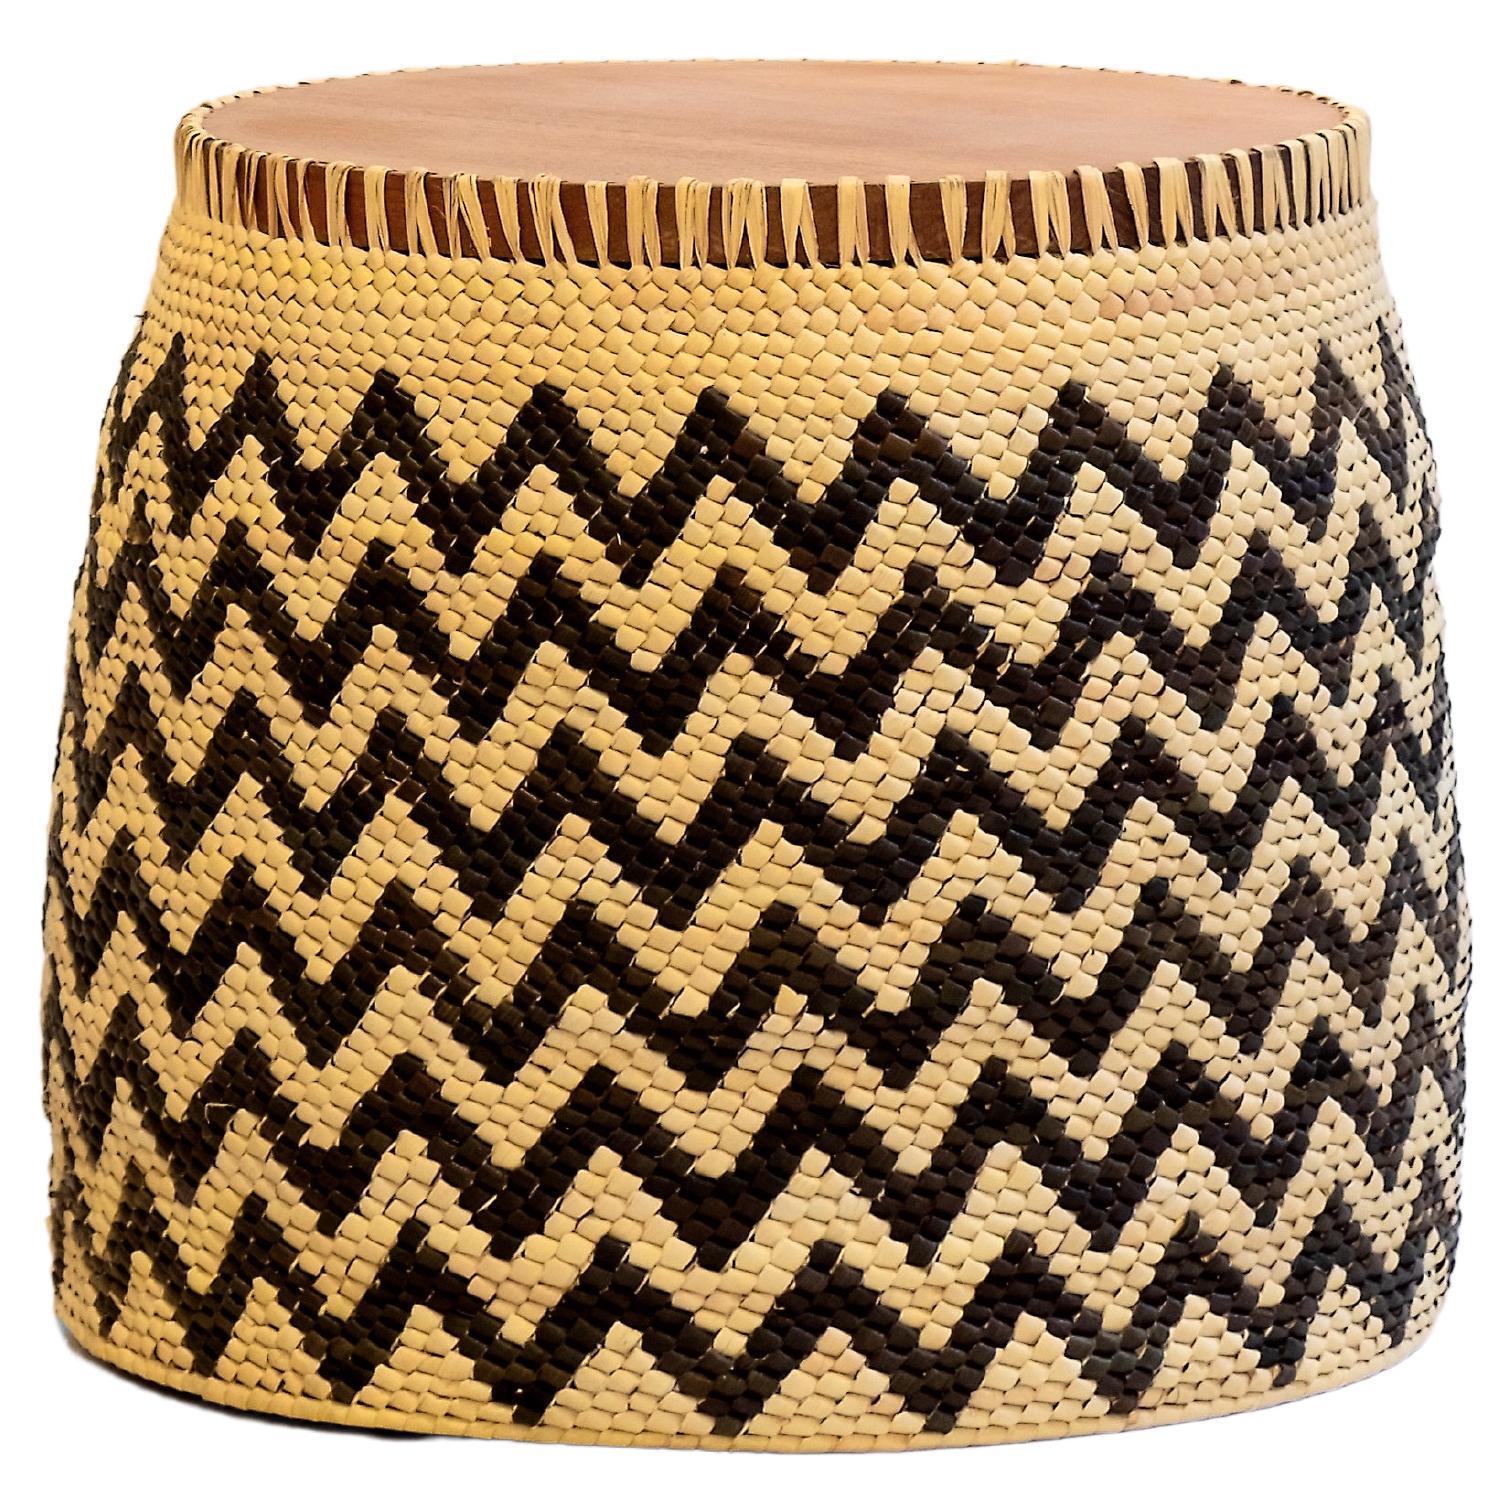 Palafitas side table S: handcrafted in Brazil with tucumã straw and solid wood